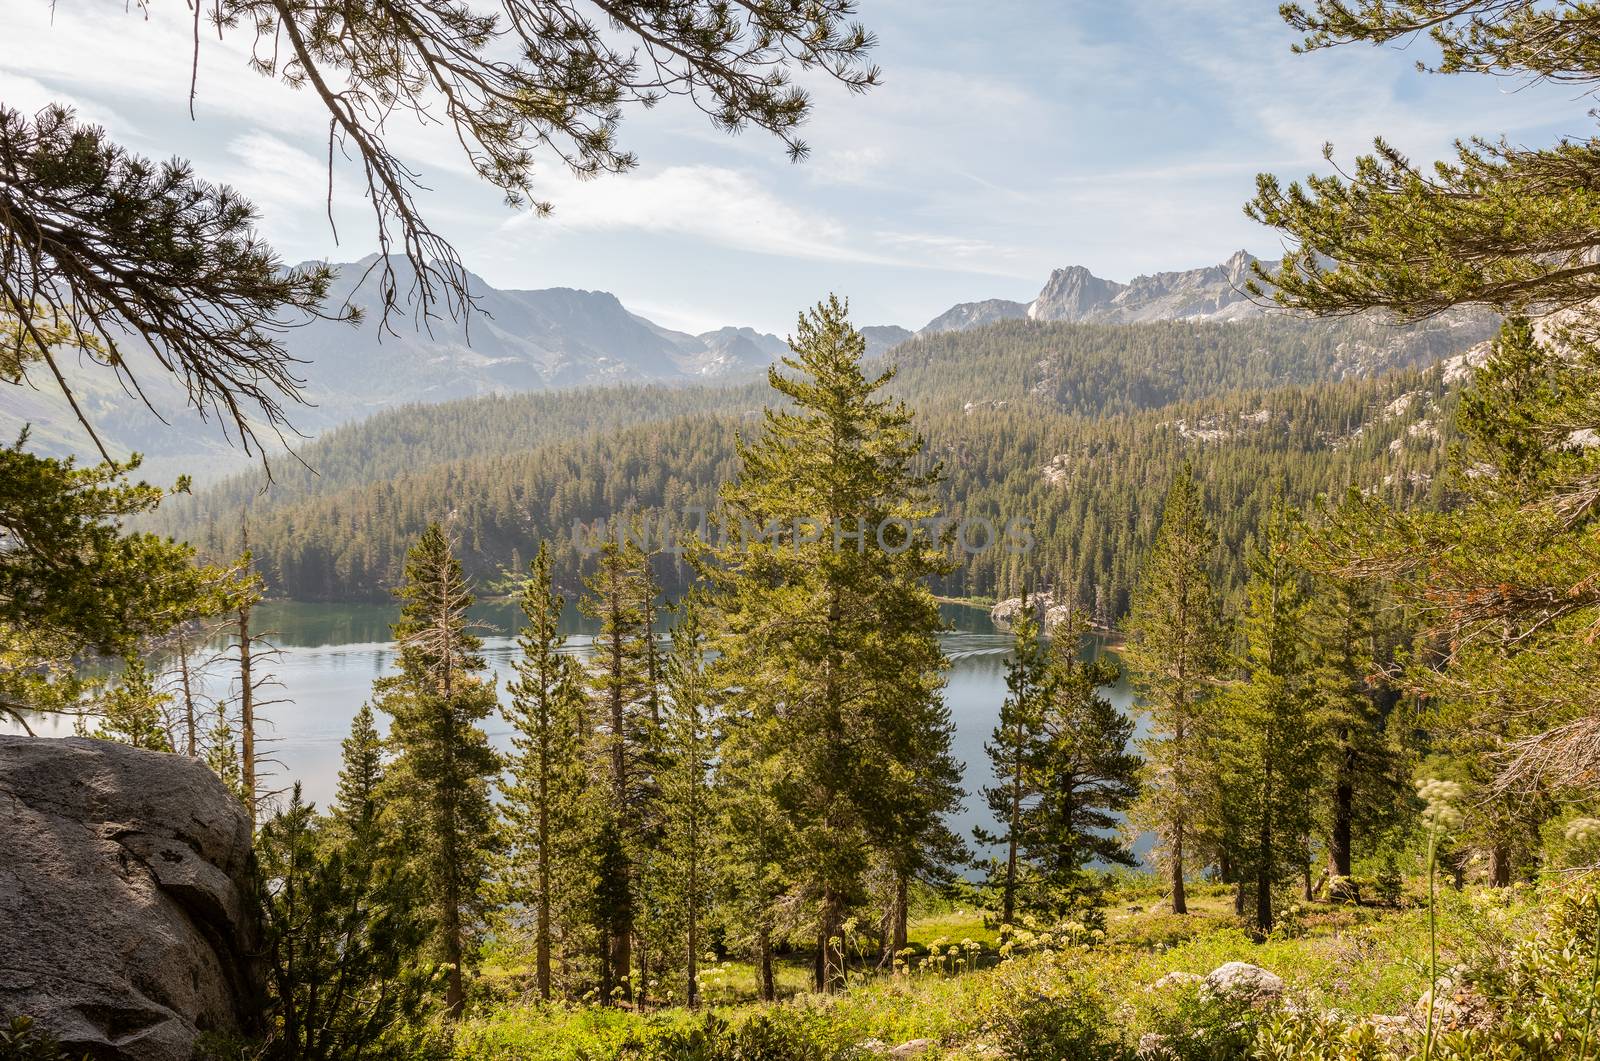 Mountainside with pine trees and lake in the distance in Mammoth Lakes, California by Njean